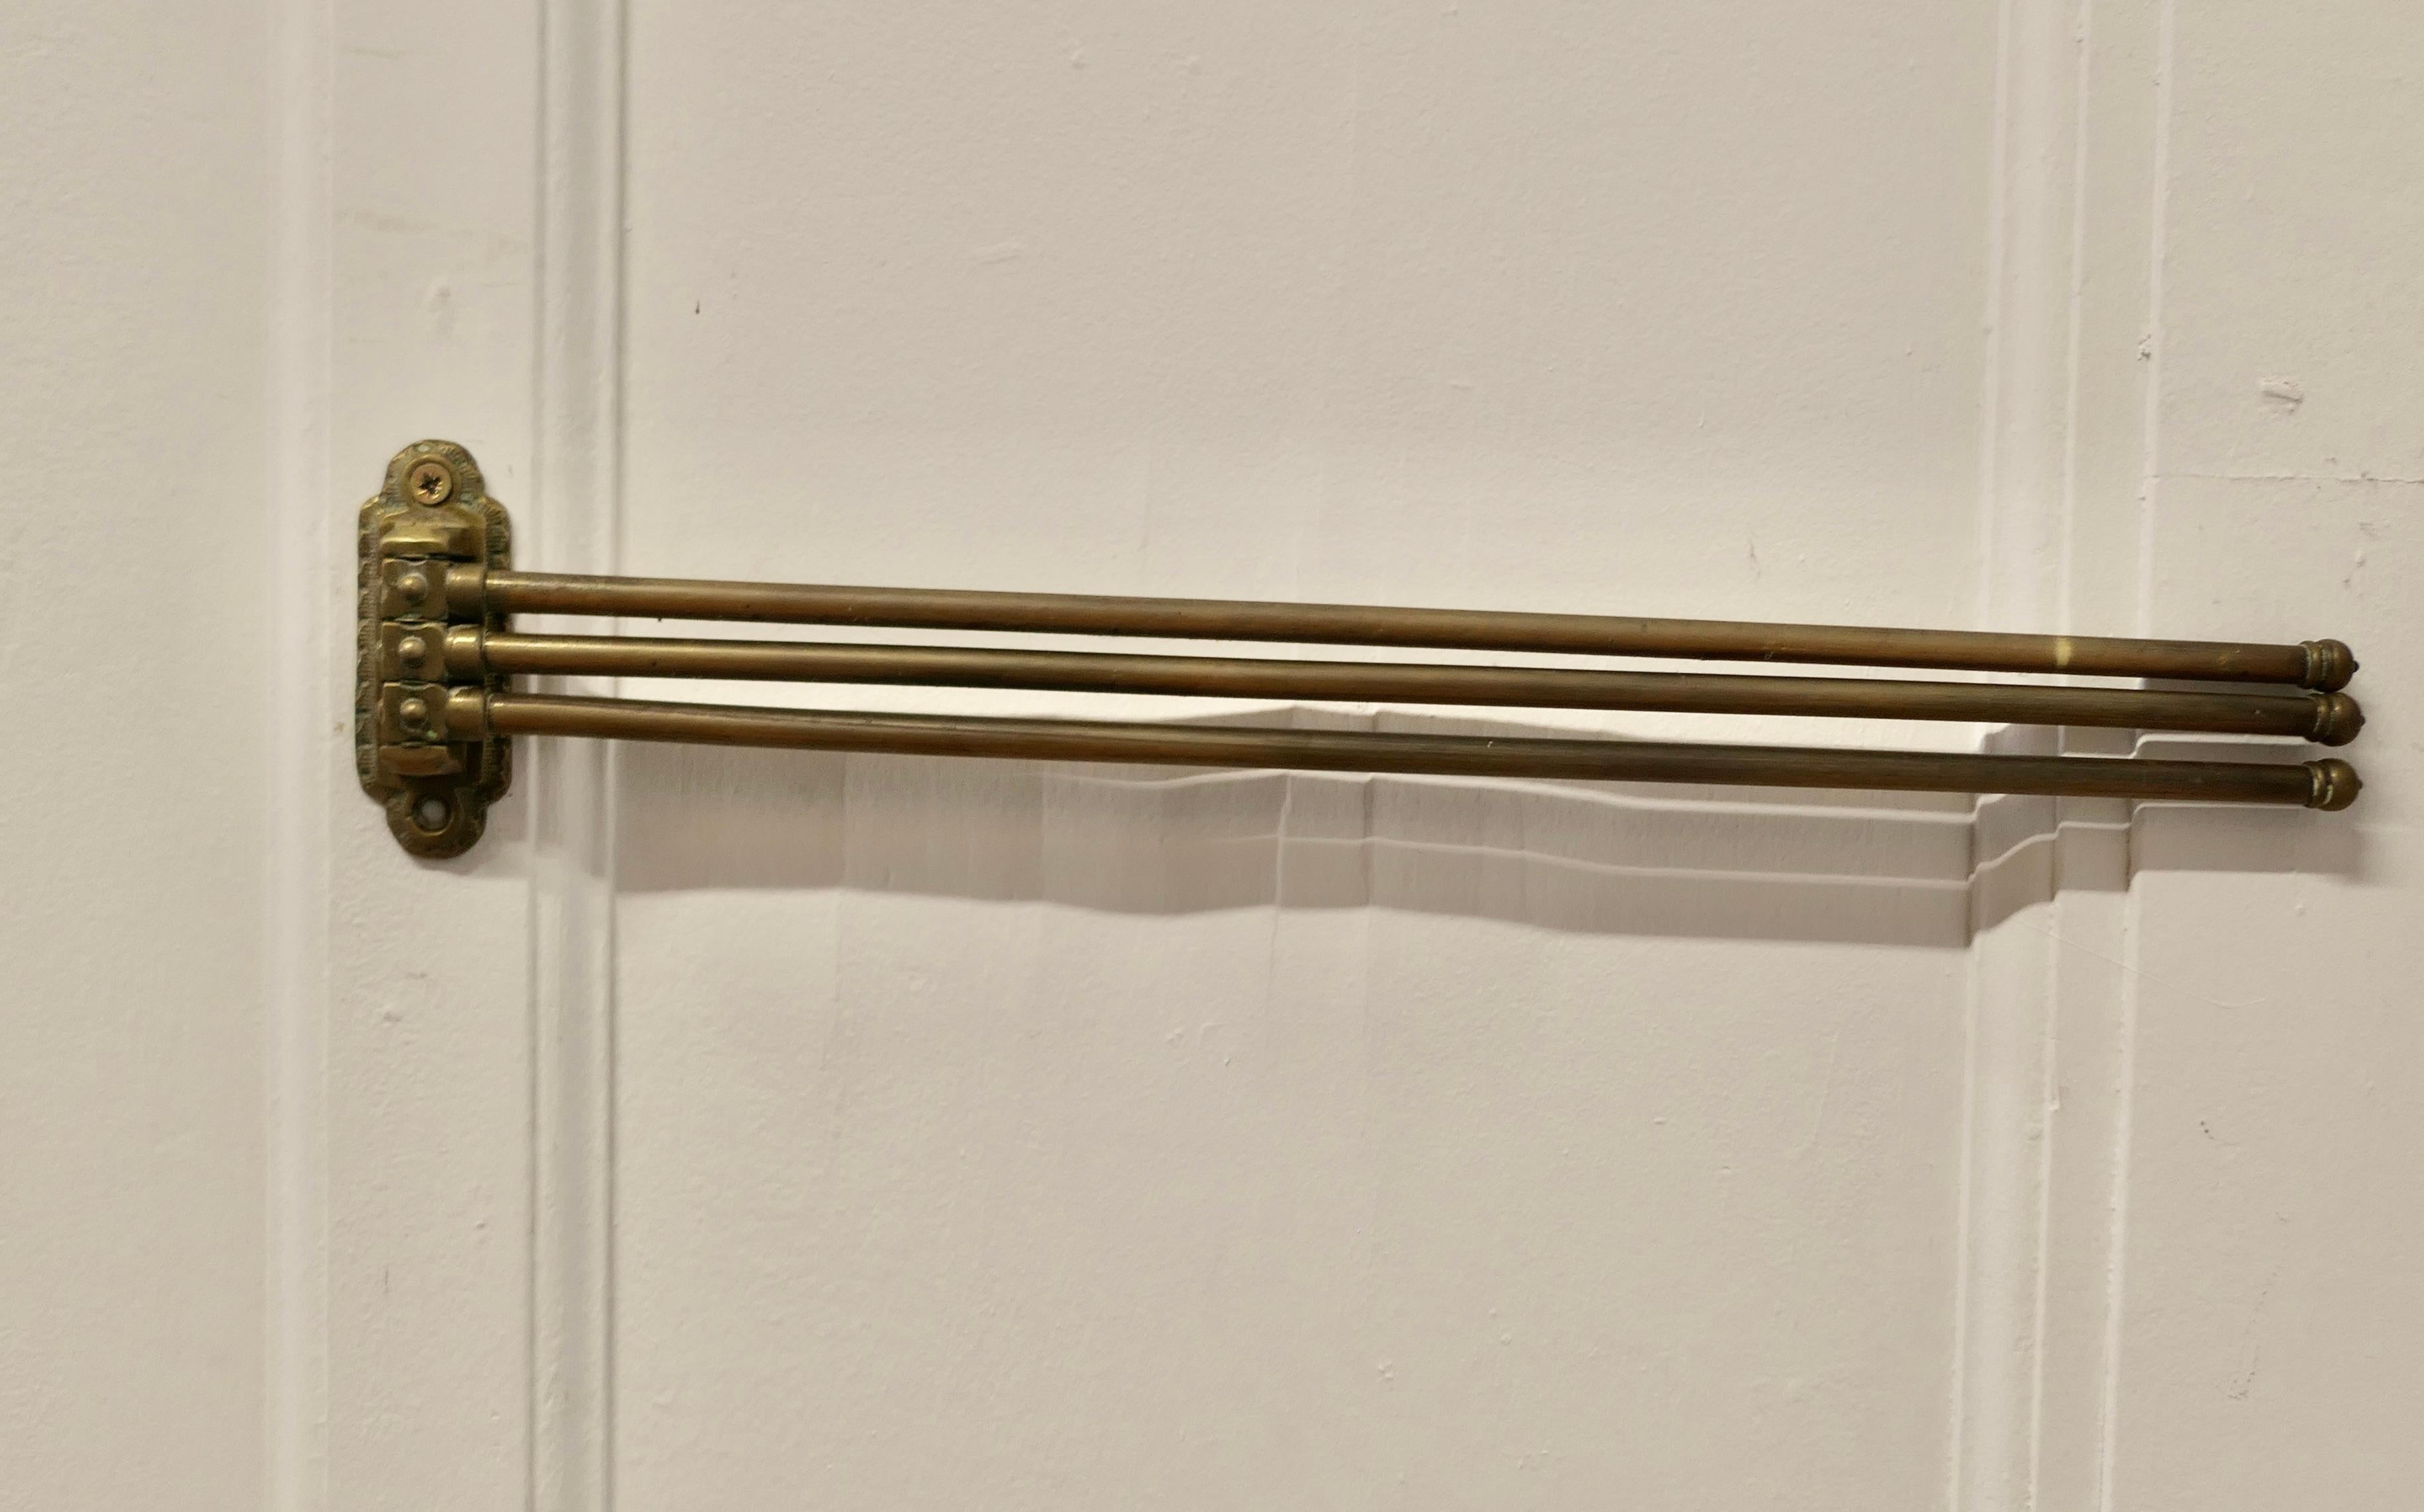 Victorian Brass 3 Branch Folding Towel Rail

This is an elegant little towel rail, it is made in solid brass and has 3 swinging arms, these can be set at choice of angle up to  360°
The rail is 20” long and 4” high  
TVY155